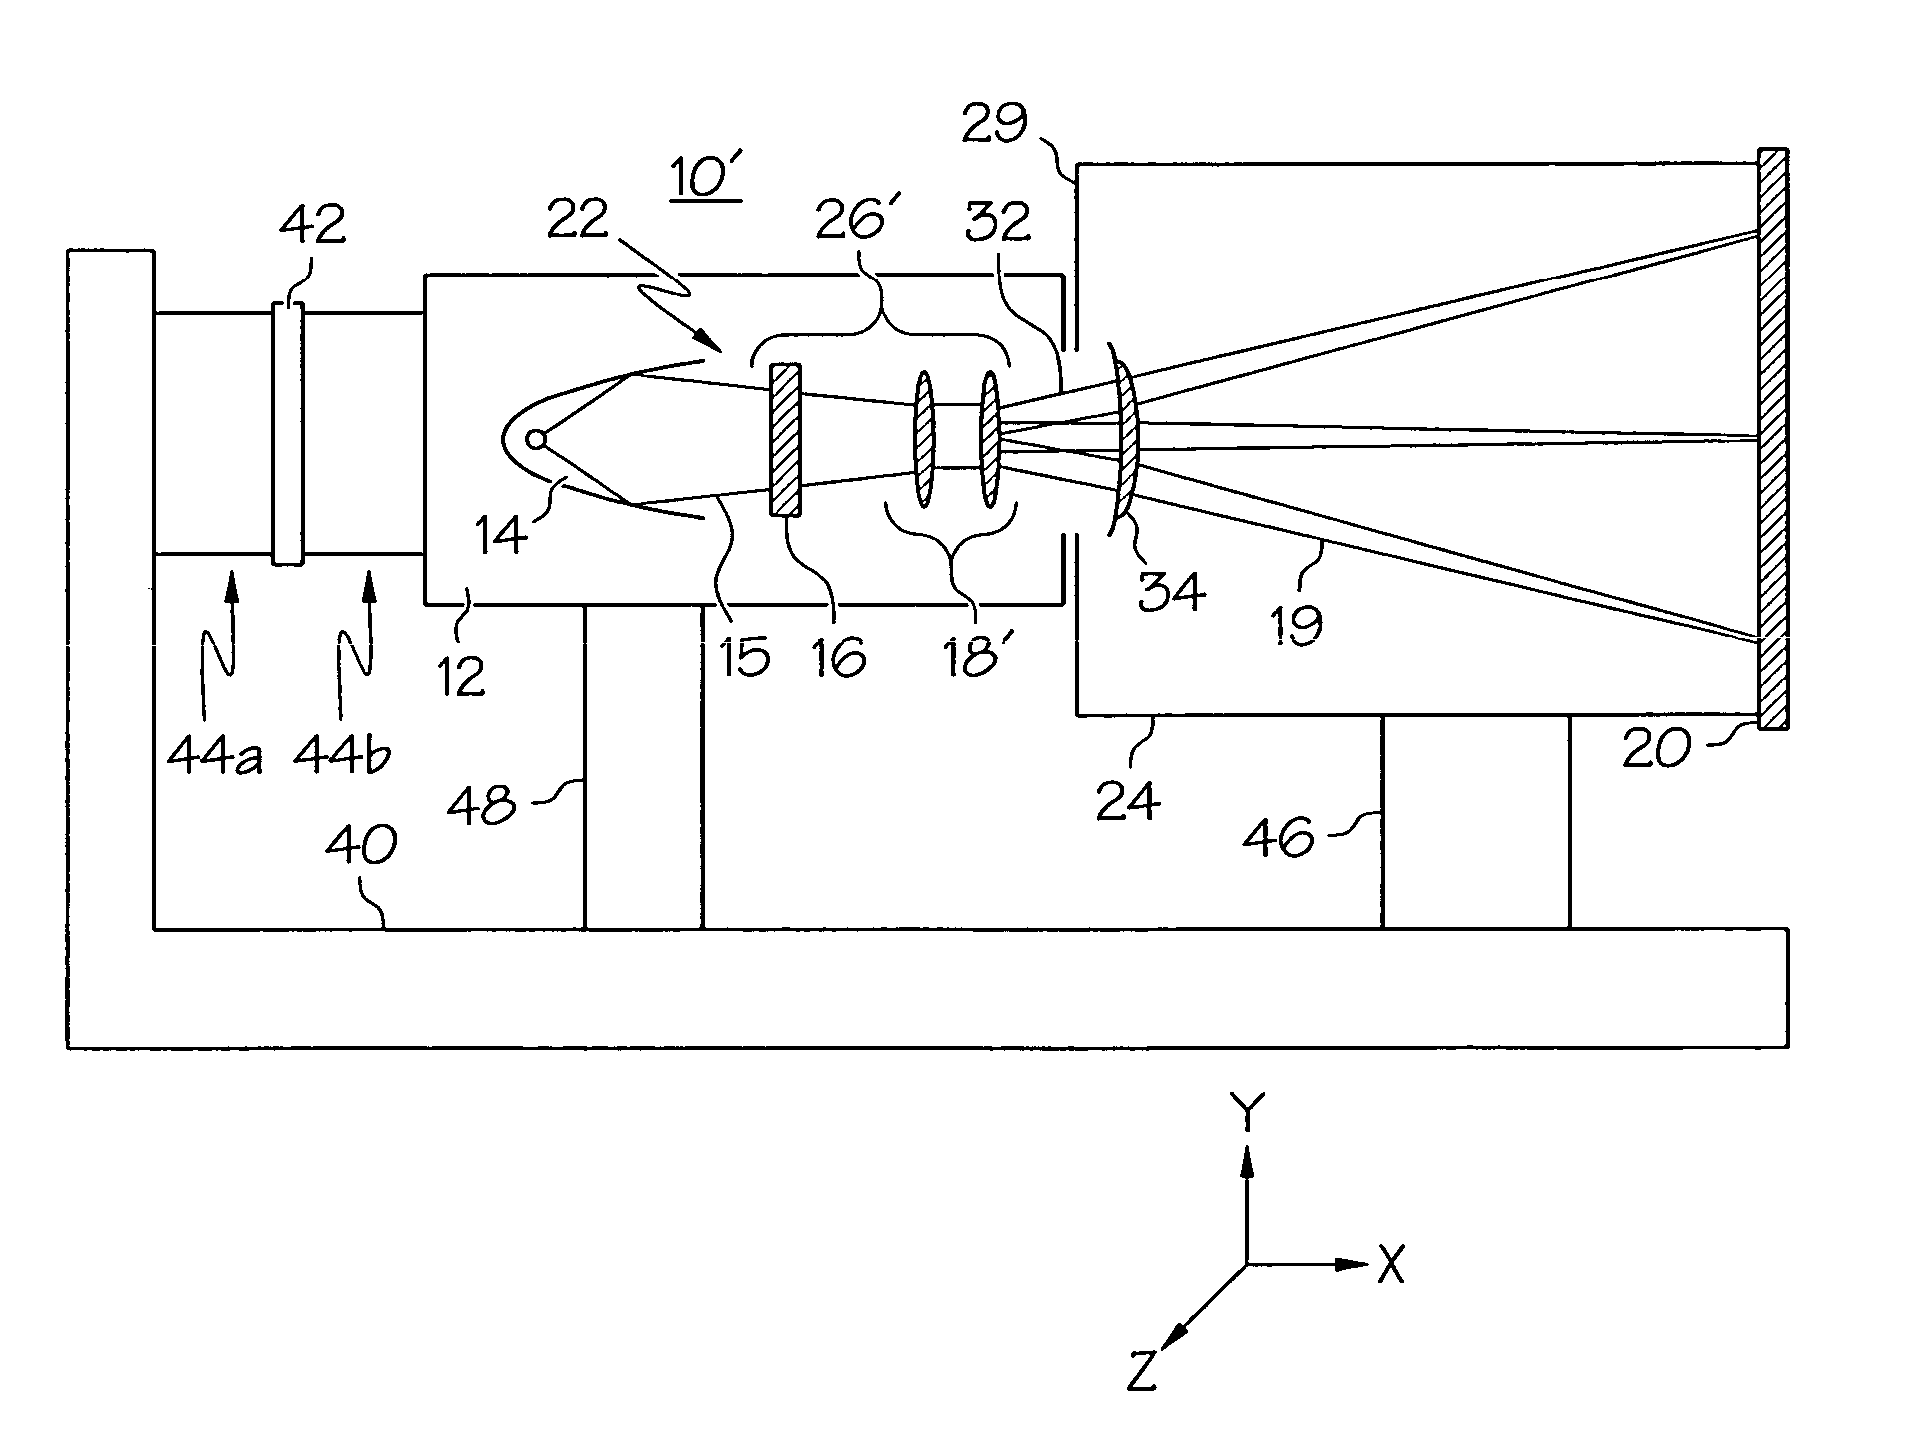 Image projection system with vibration compensation